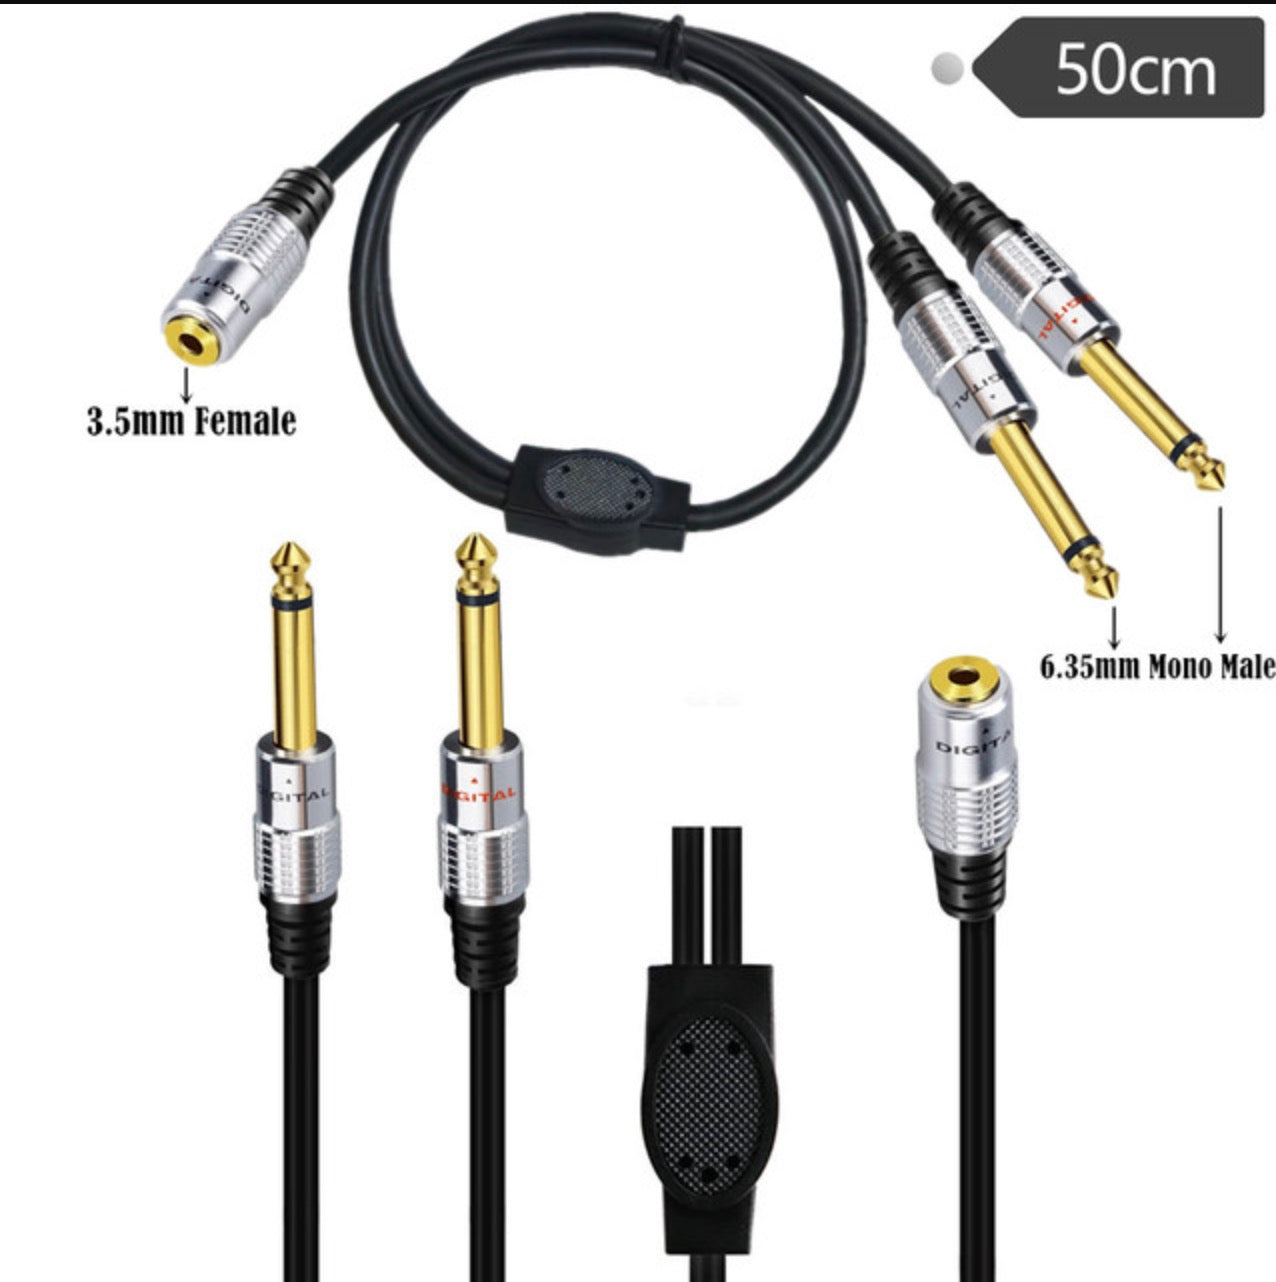 3.5mm 1/4" inch Female to Dual 6.35mm TS Male Stereo Headphone Guitar Extension Cable 0.5m